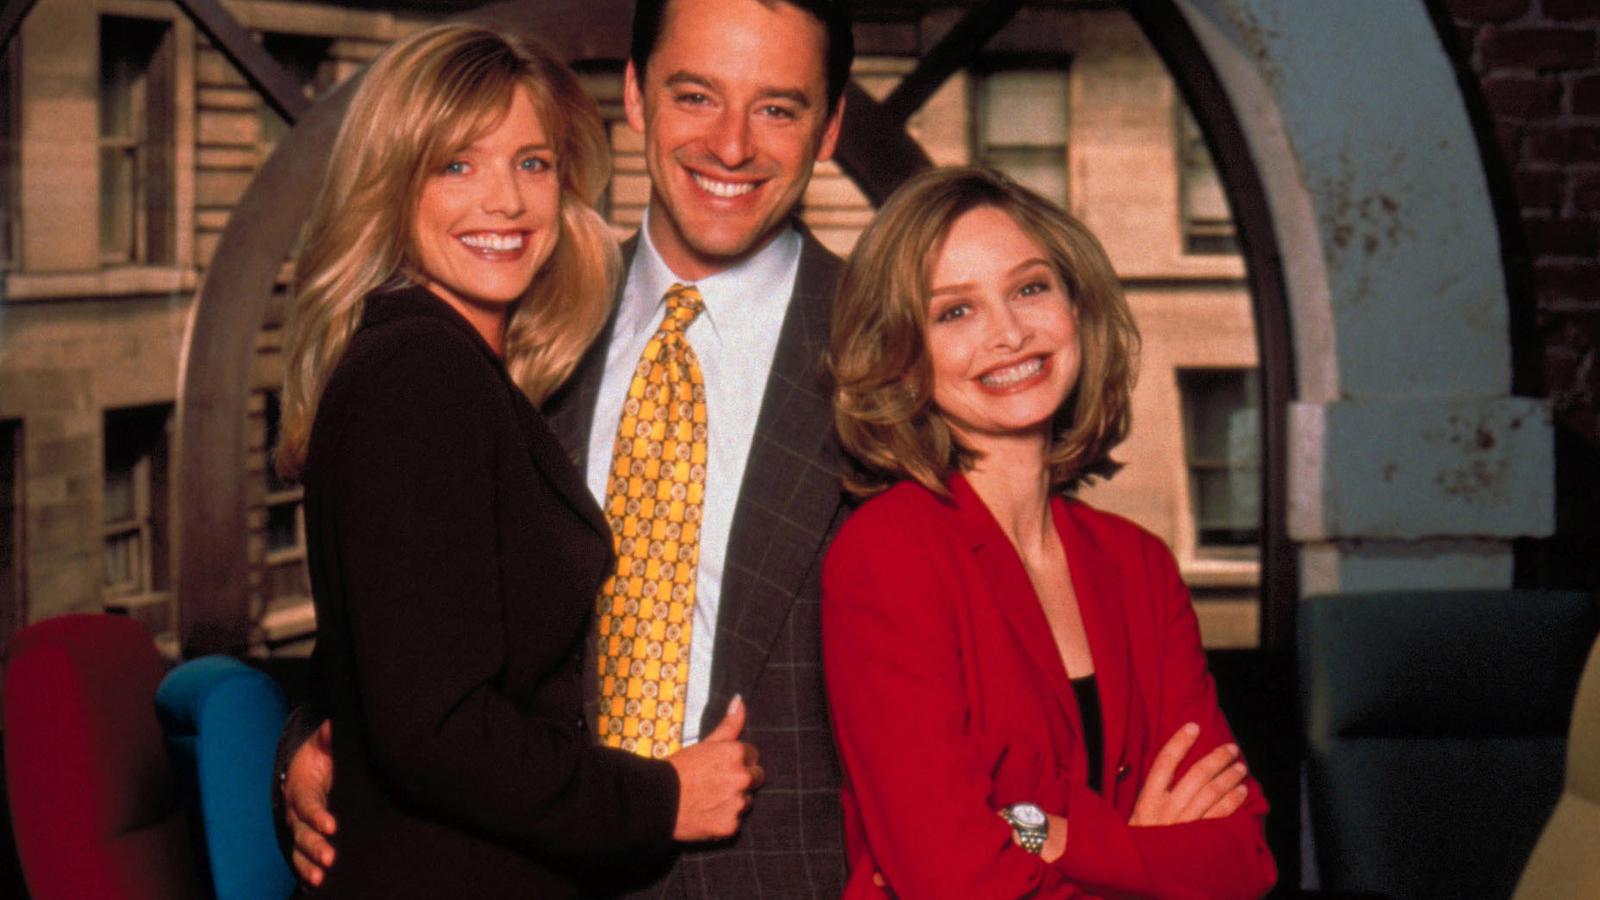 The trio of Ally, Billy, and Georgia in Ally McBeal.